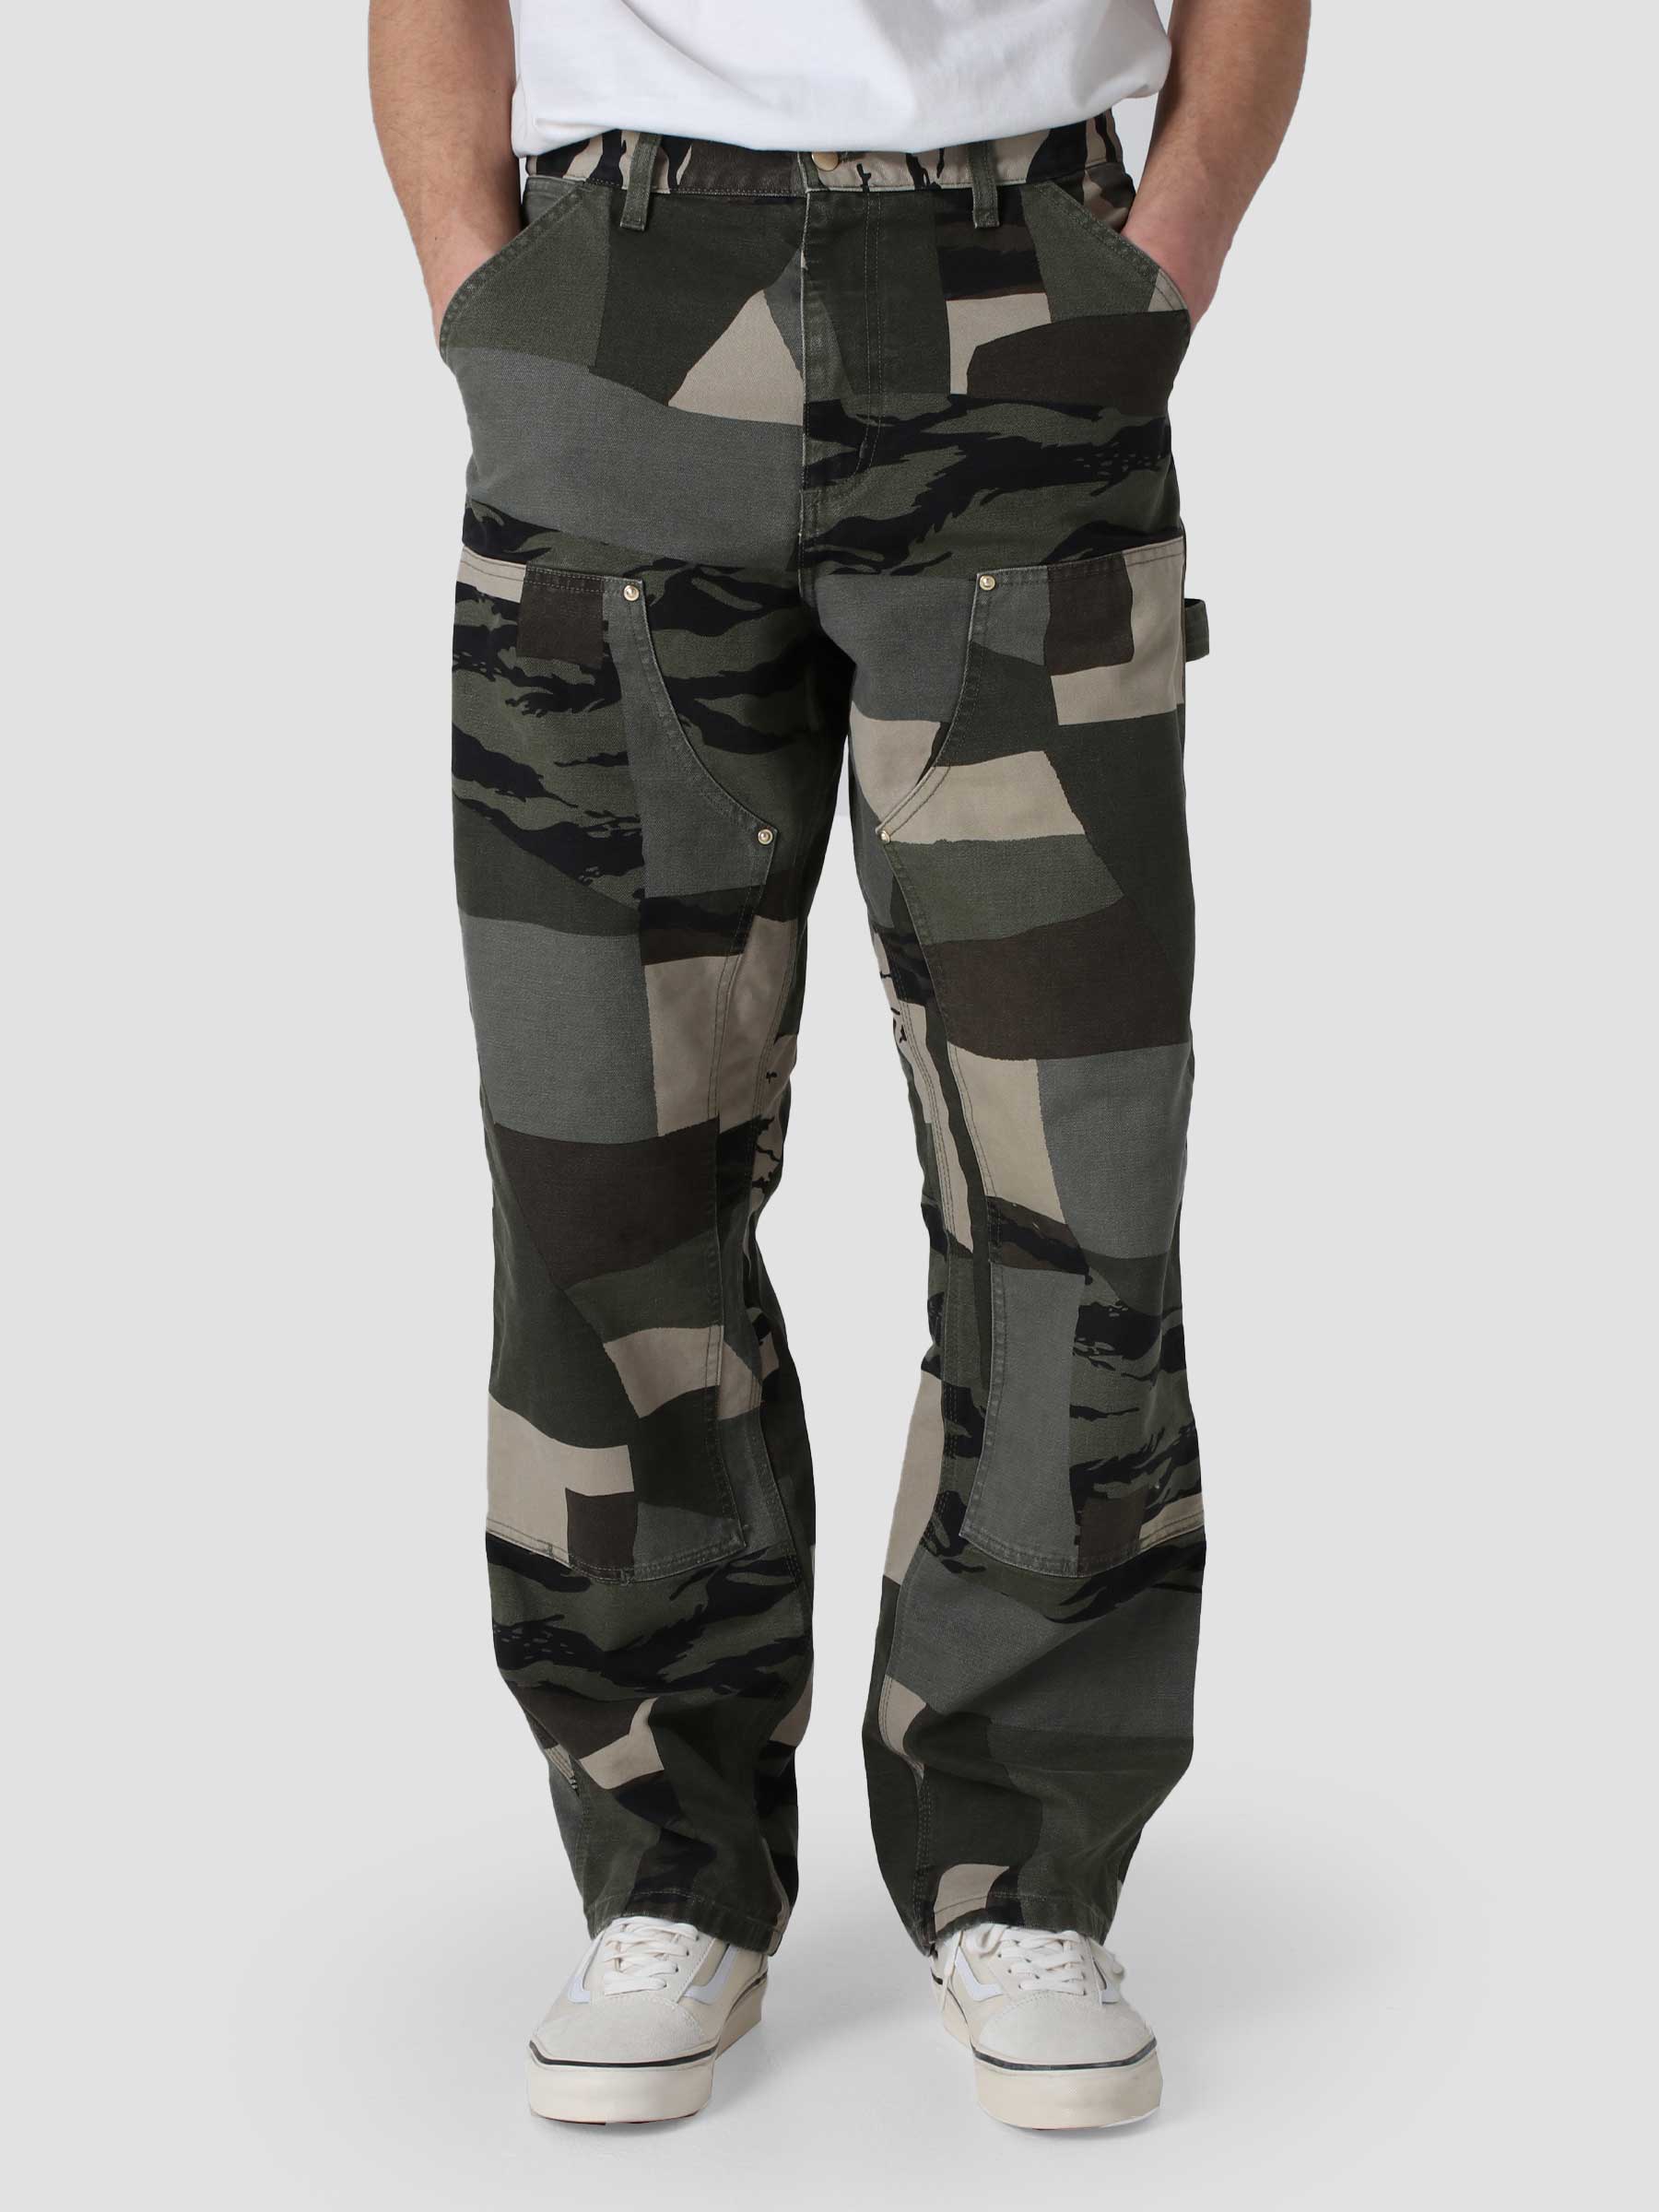 Sneakerjagers Outfit Picks Carhartt WIP Double Knee Pant Camo Mend Stone Washed